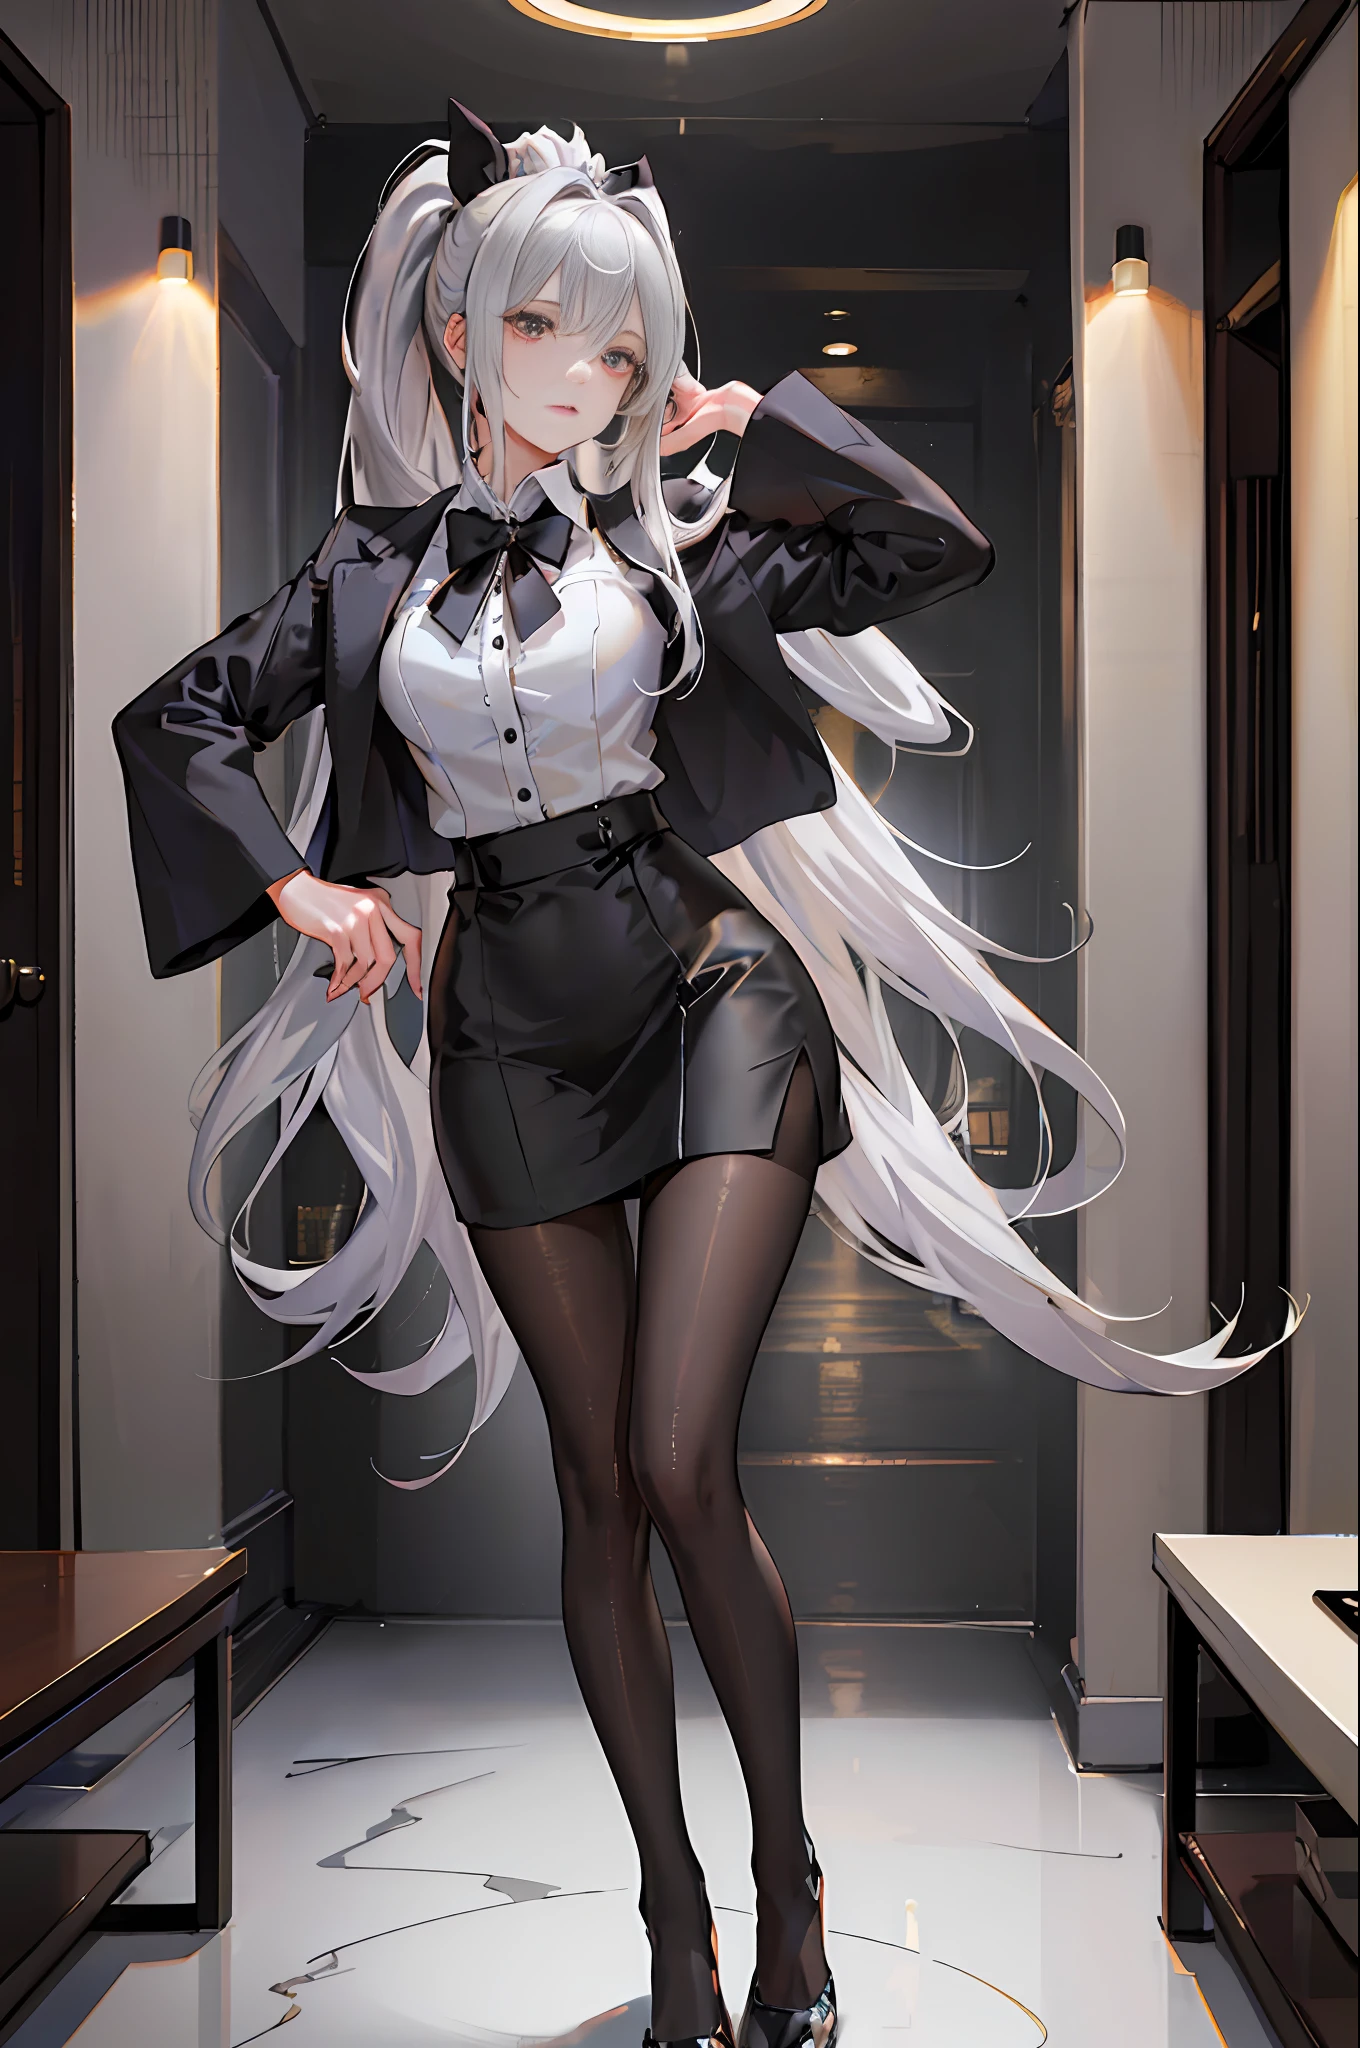 ((1 girl)),(high detailhyper quality,high resolution,),(Exquisite makeup),{dim light},(detailed background),(living room),((fluffy silver hair, busty slender girl with high ponytail)), avoid blonde eyes in the ominous living room, ((girl wears white shirt, black wrinkled skirt, with black sheer pantyhose))), {shows a slender figure and graceful curves}, (standing), (hands behind the head)), hands behind the head, (facial details)